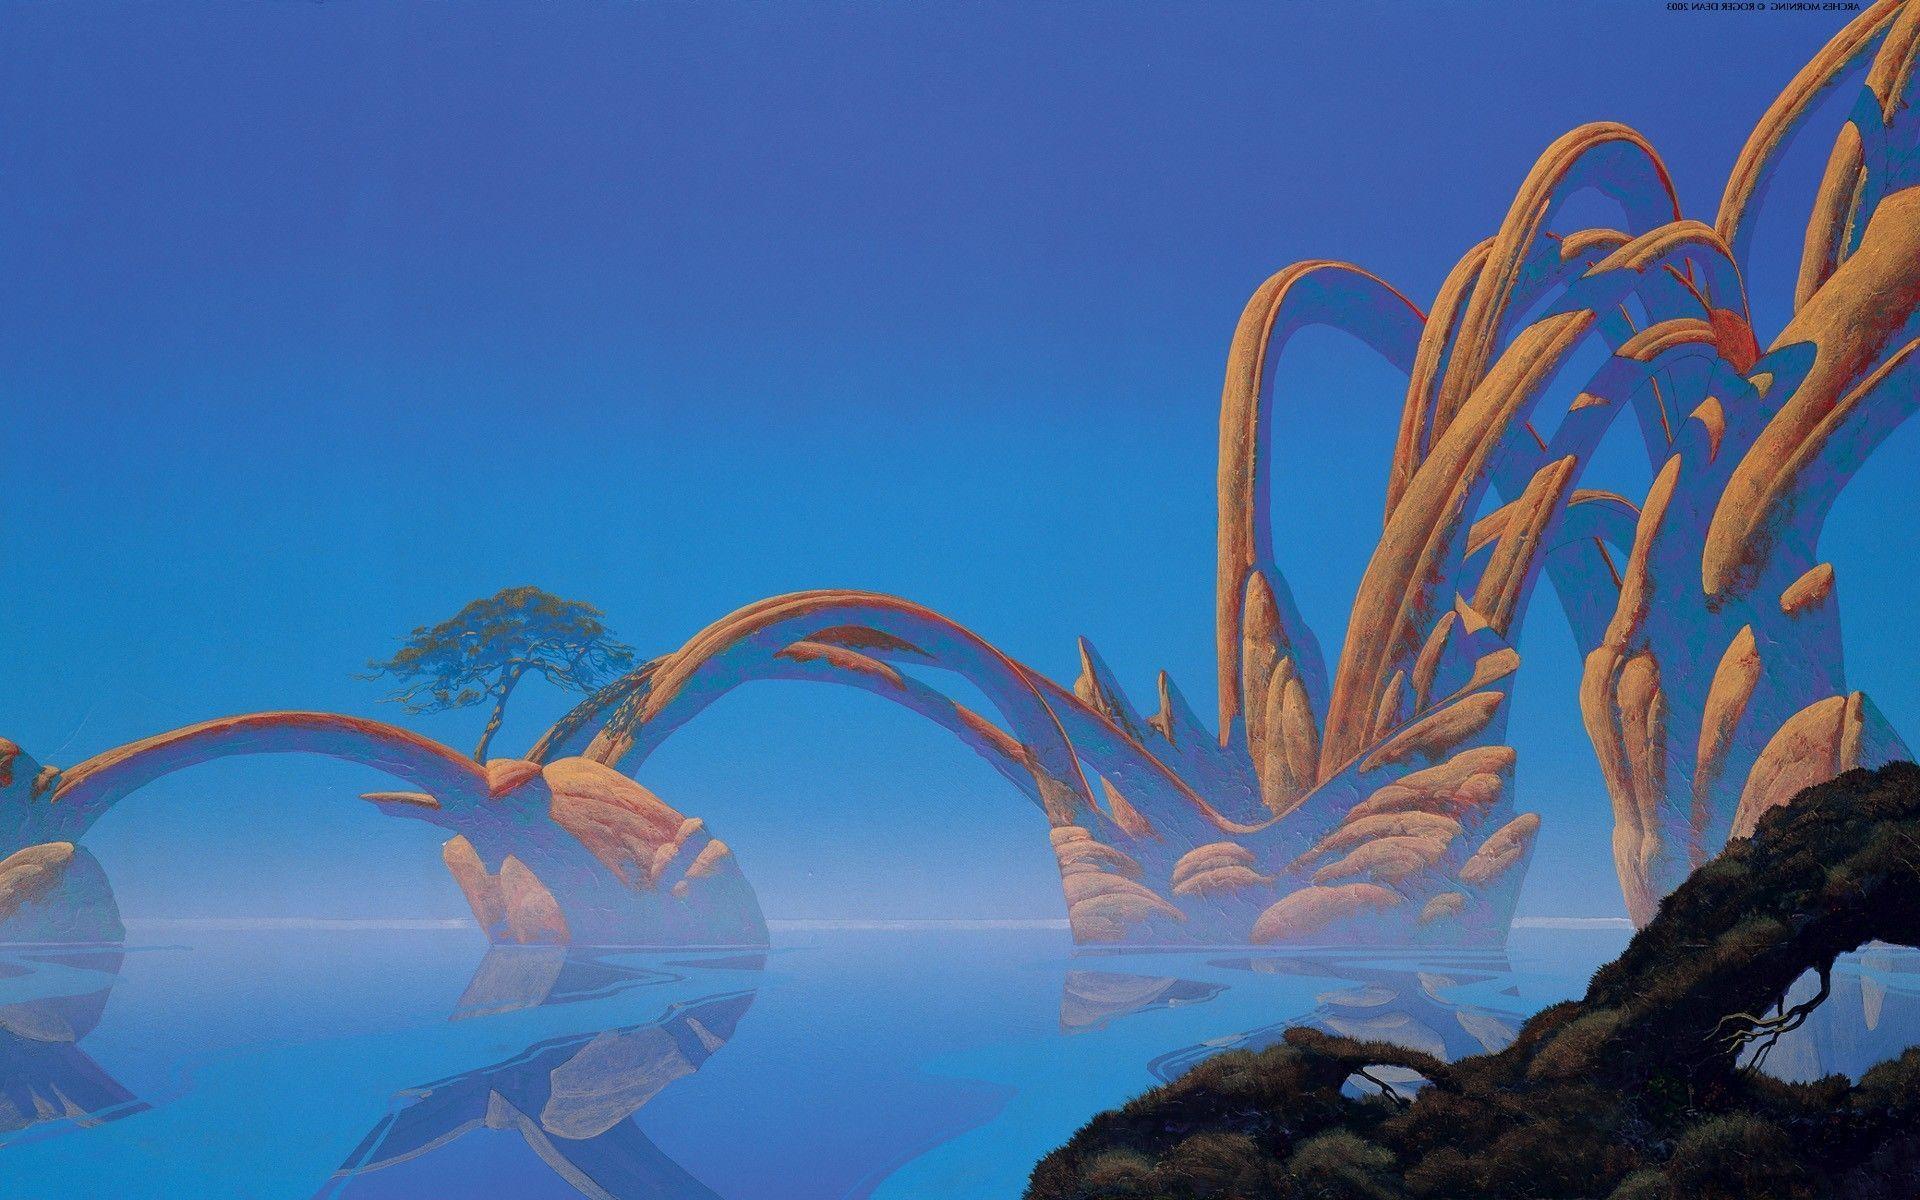 Roger Dean did many Yes album covers. Prog Rock